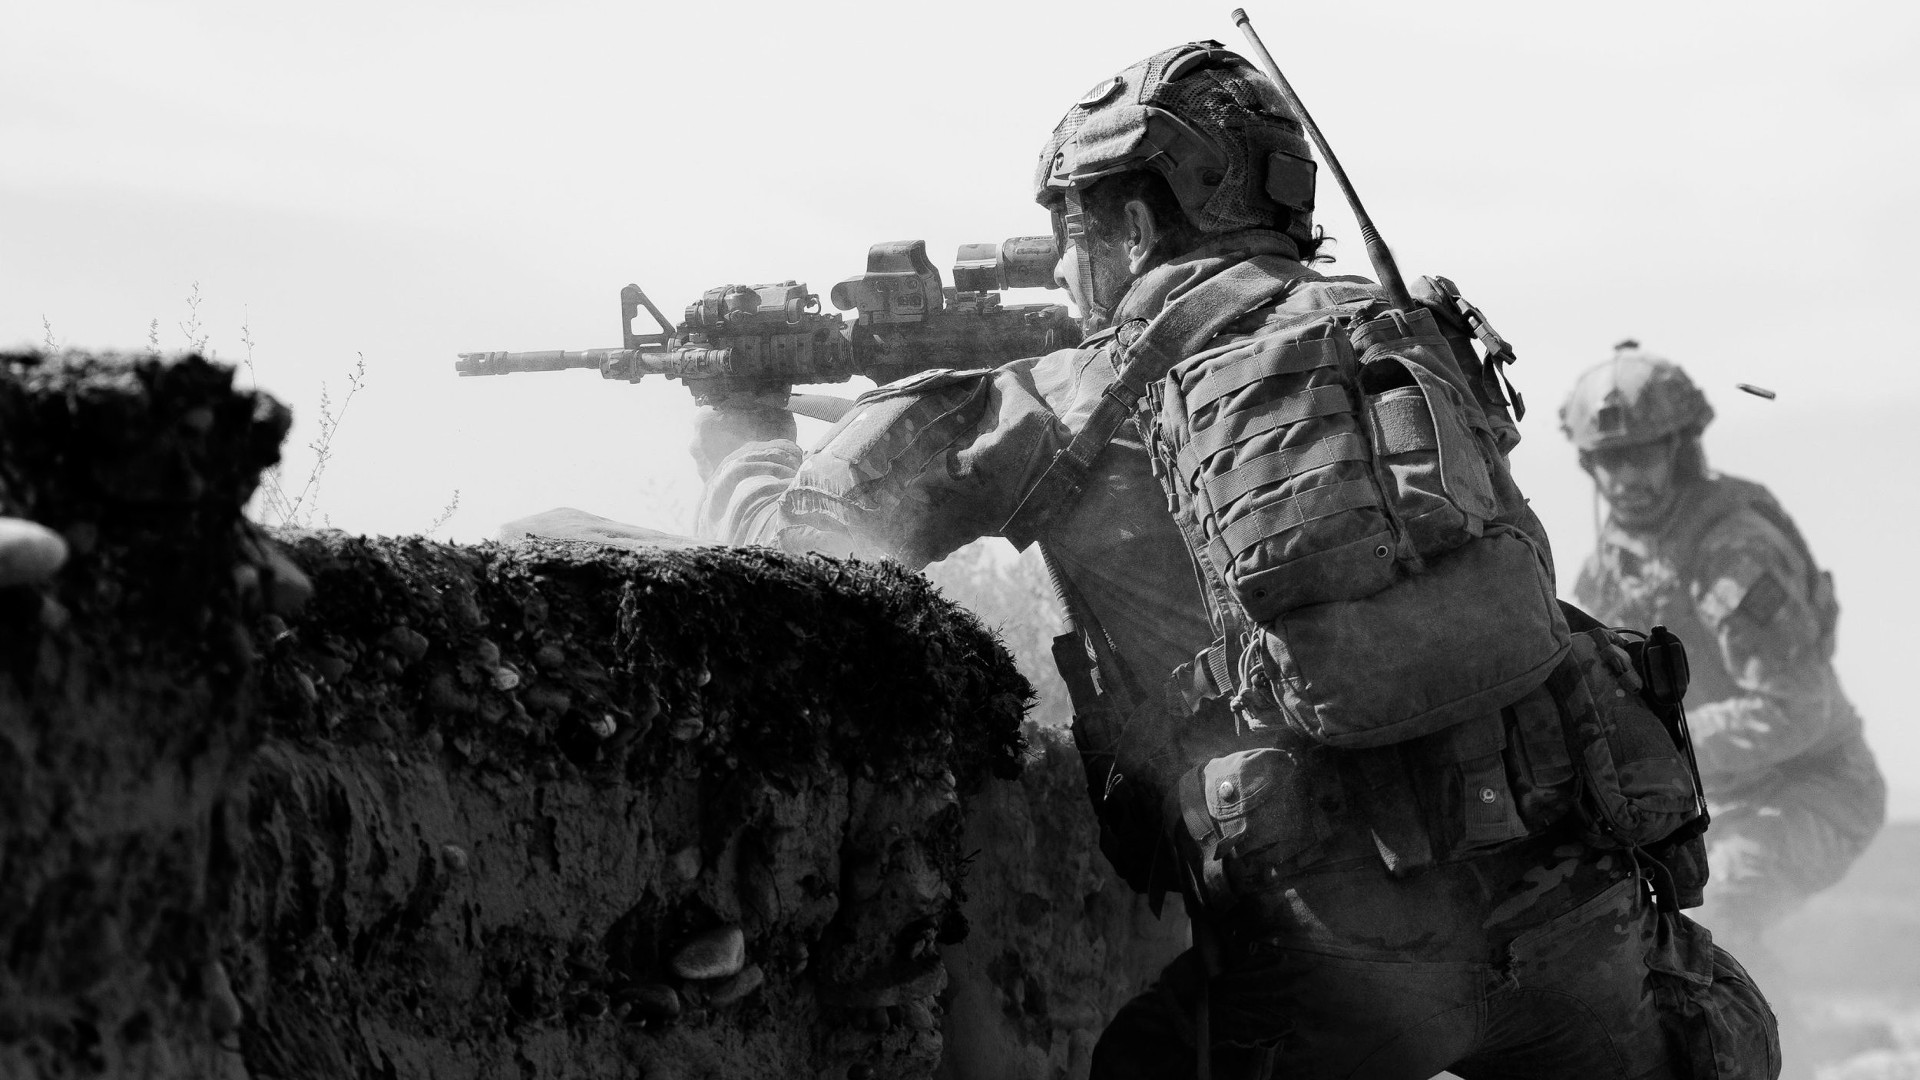 General 1920x1080 military soldier Australian Army special forces gun rifles AR-15 weapon monochrome American firearms